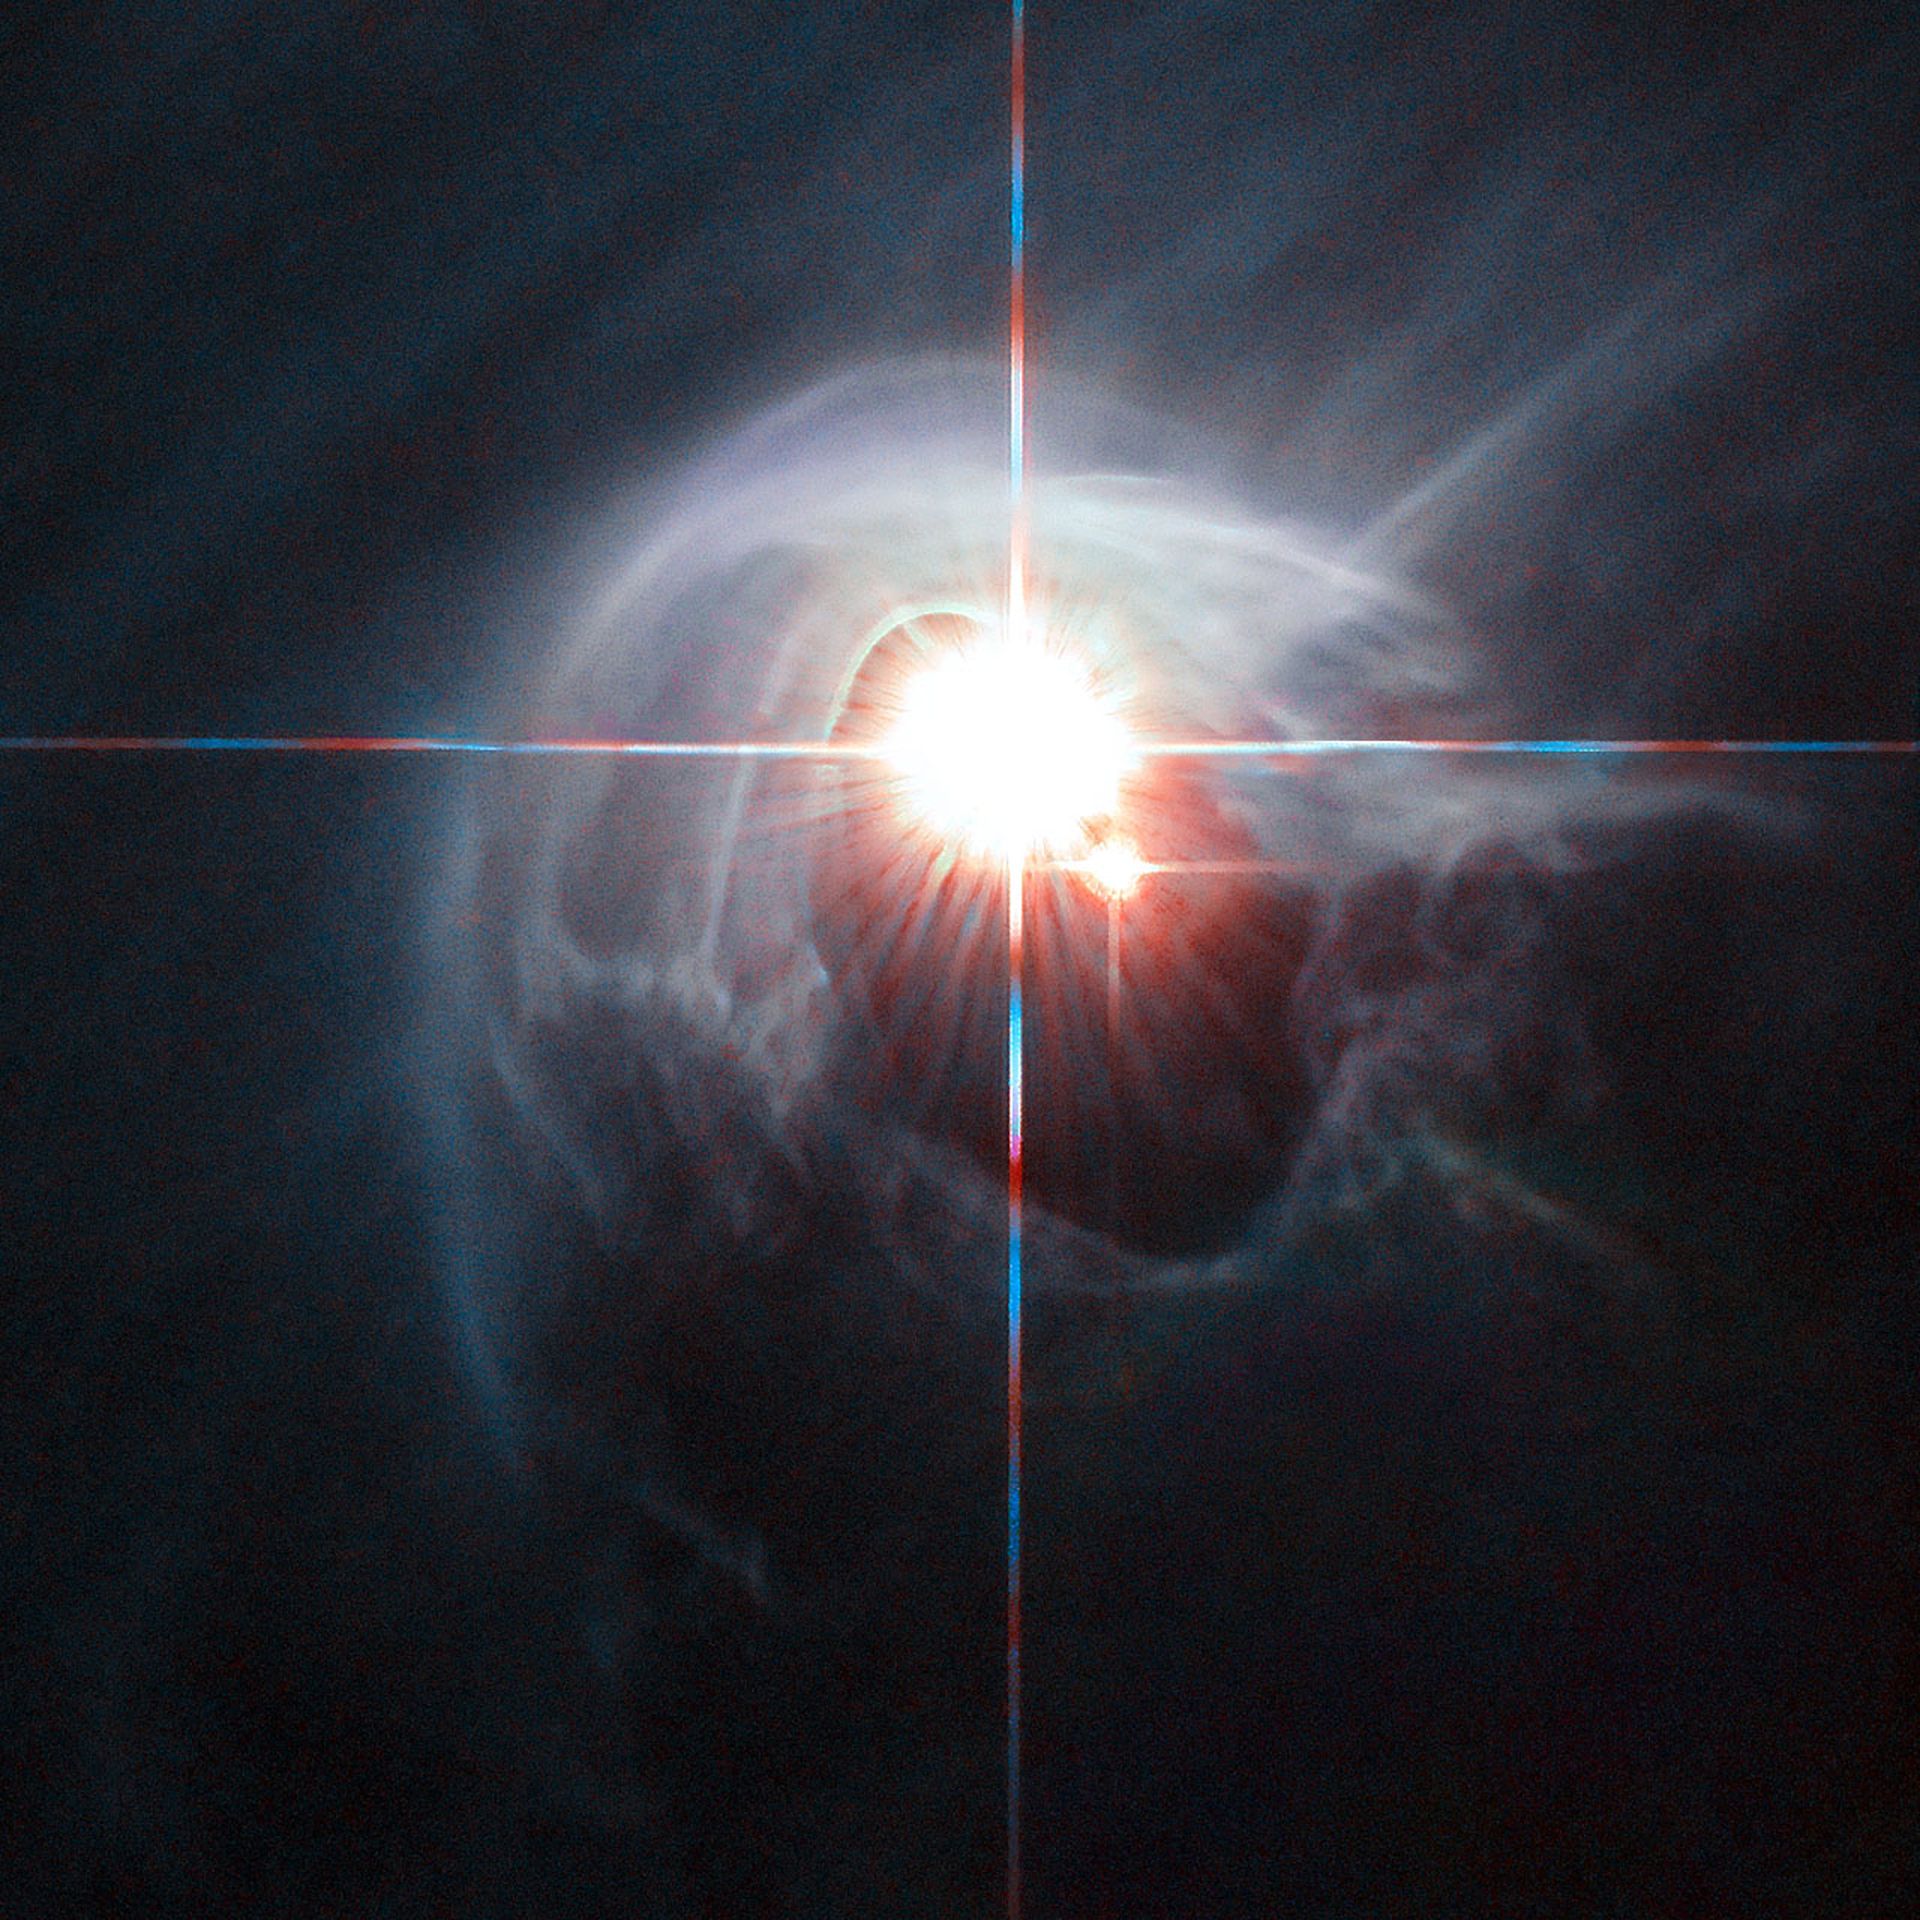 A quadruple star system seen by the Hubble Space Telescope